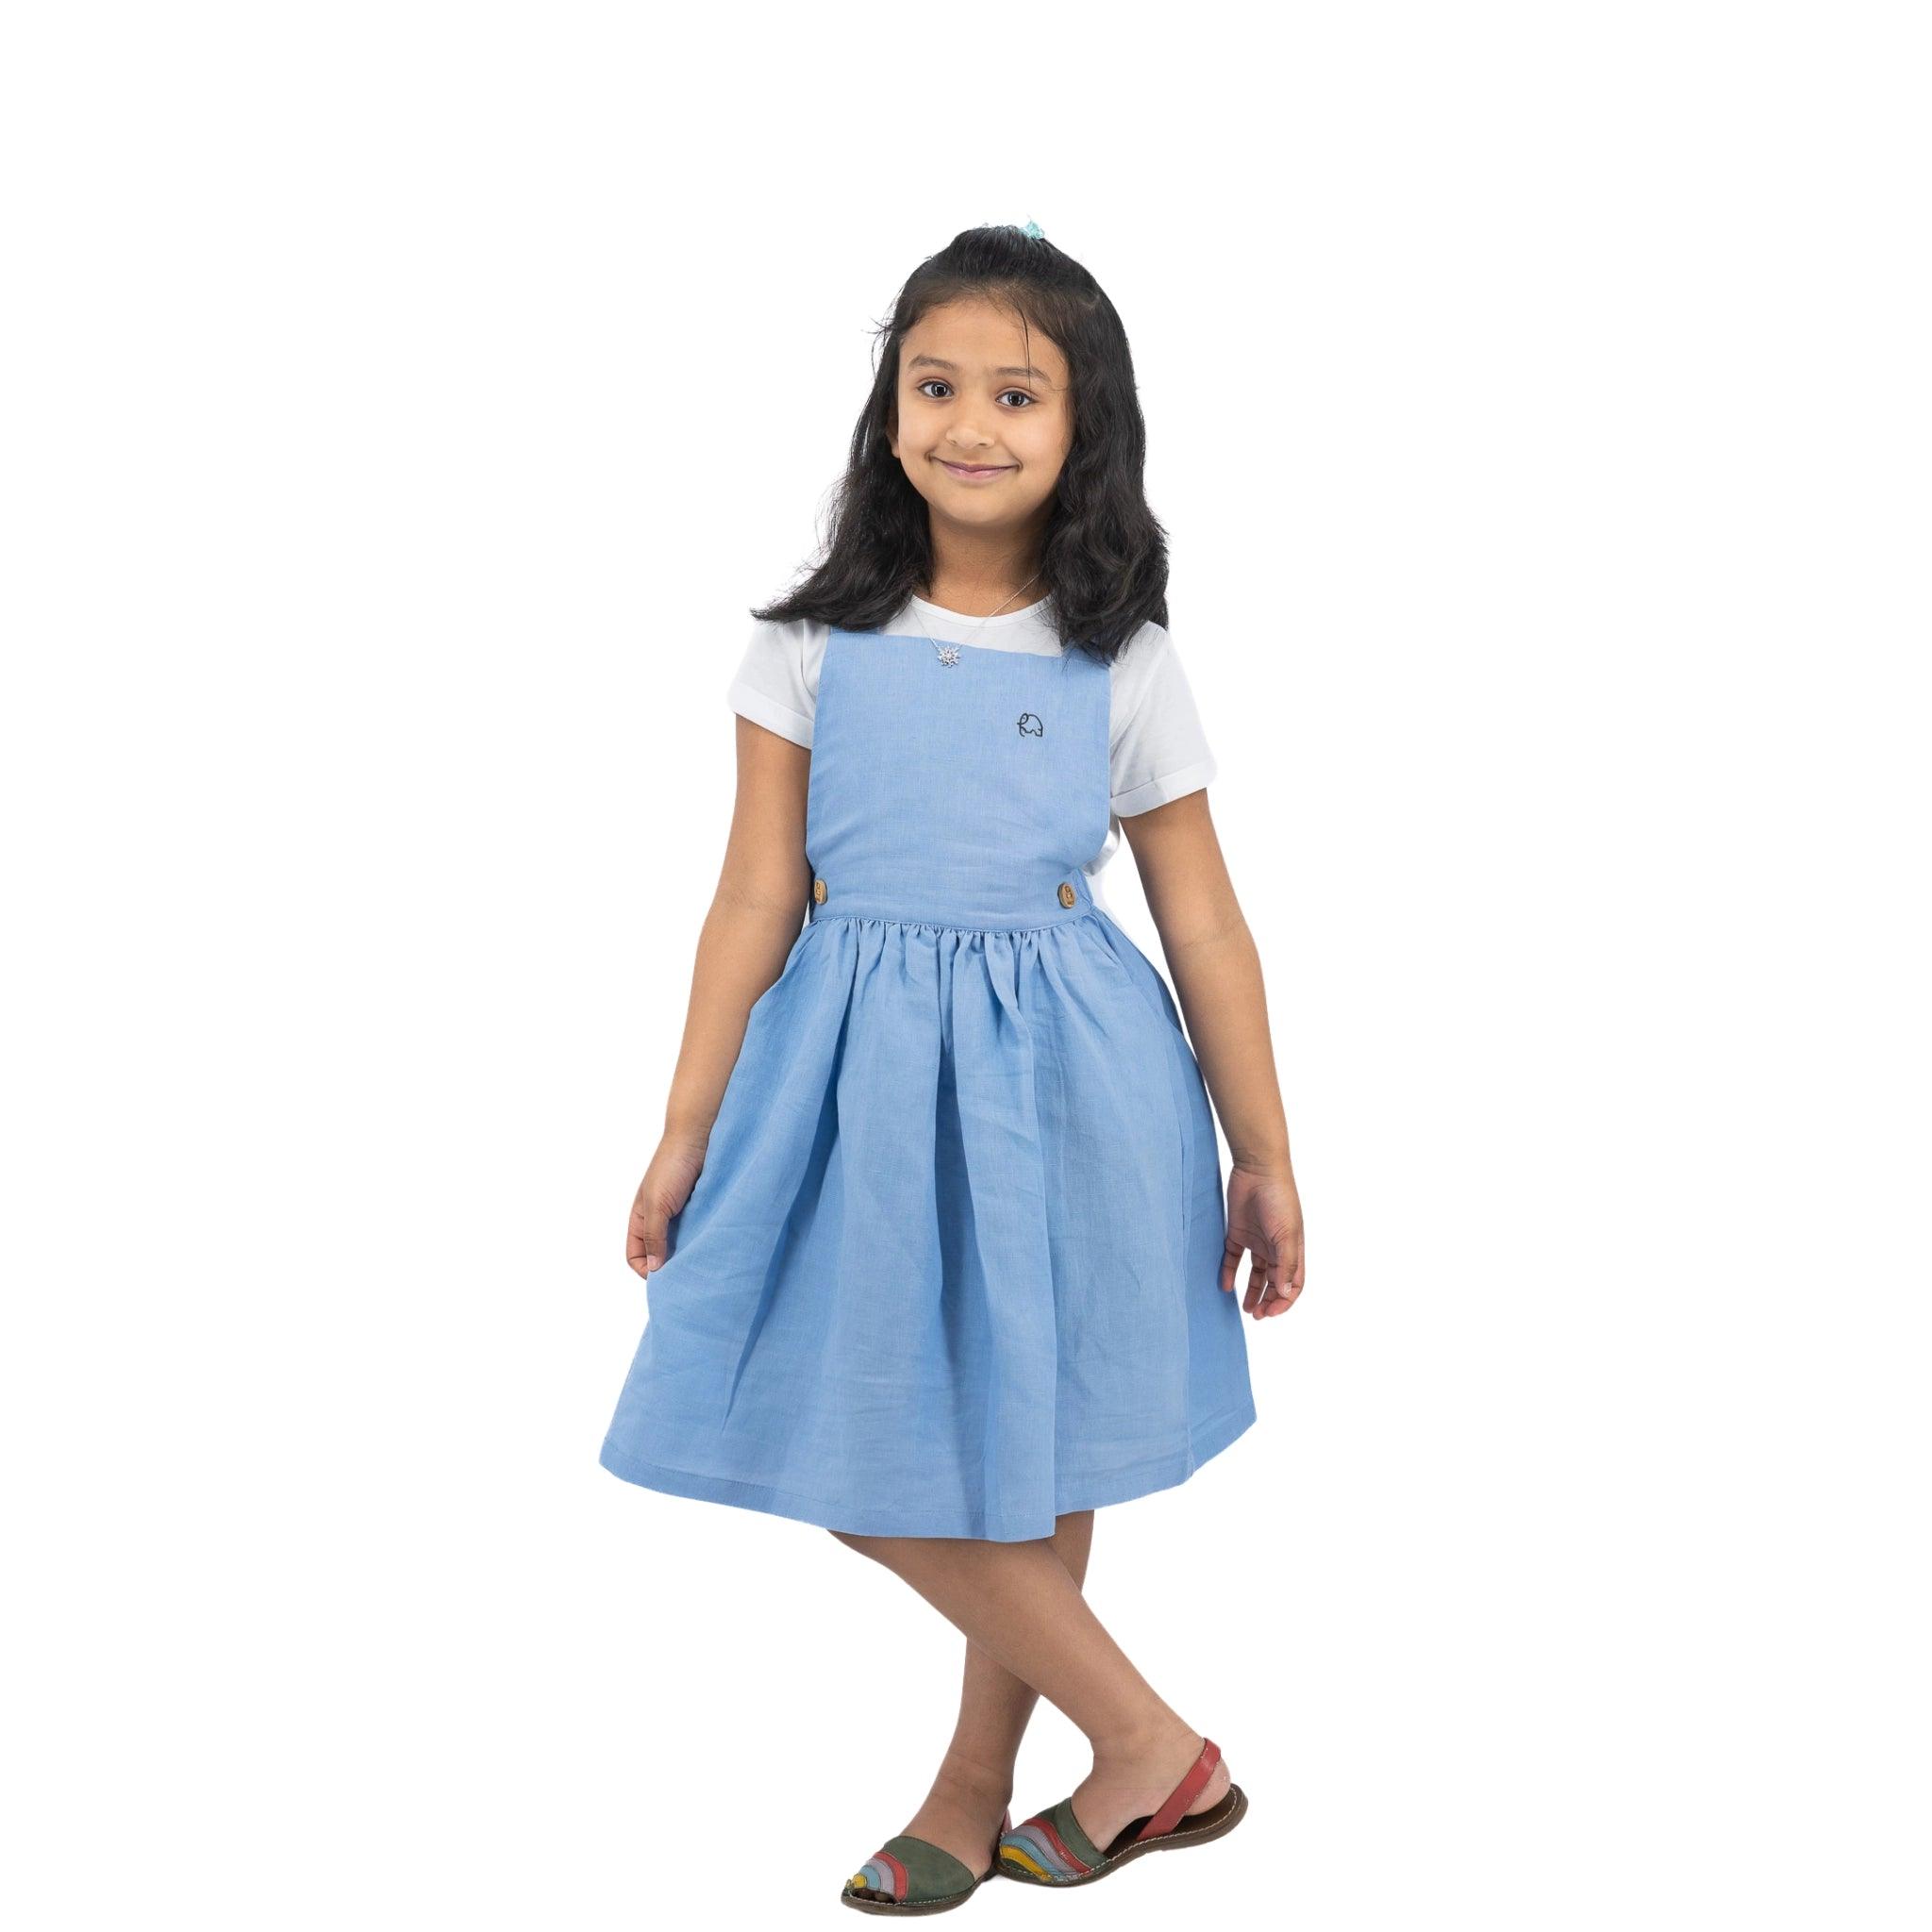 A young girl in a Karee cerulean blue linen pinafore standing and smiling against a white background.